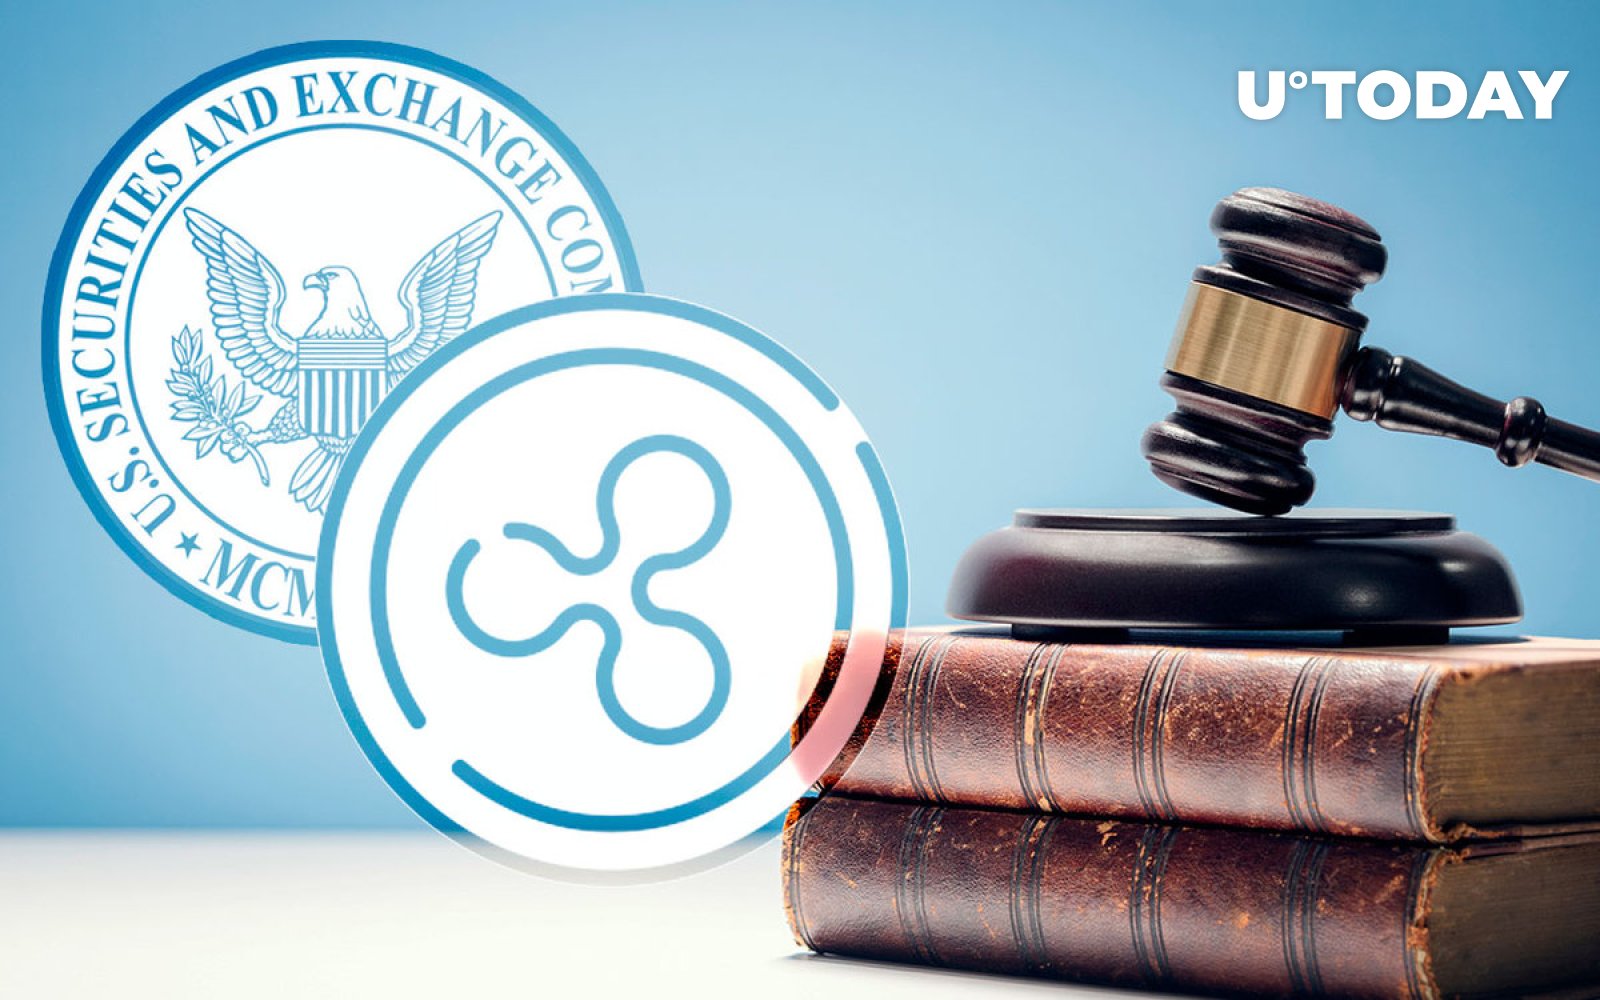 XRP Lawsuit: SEC Files Motion to “Reduce” Ripple’s Expert Testimony